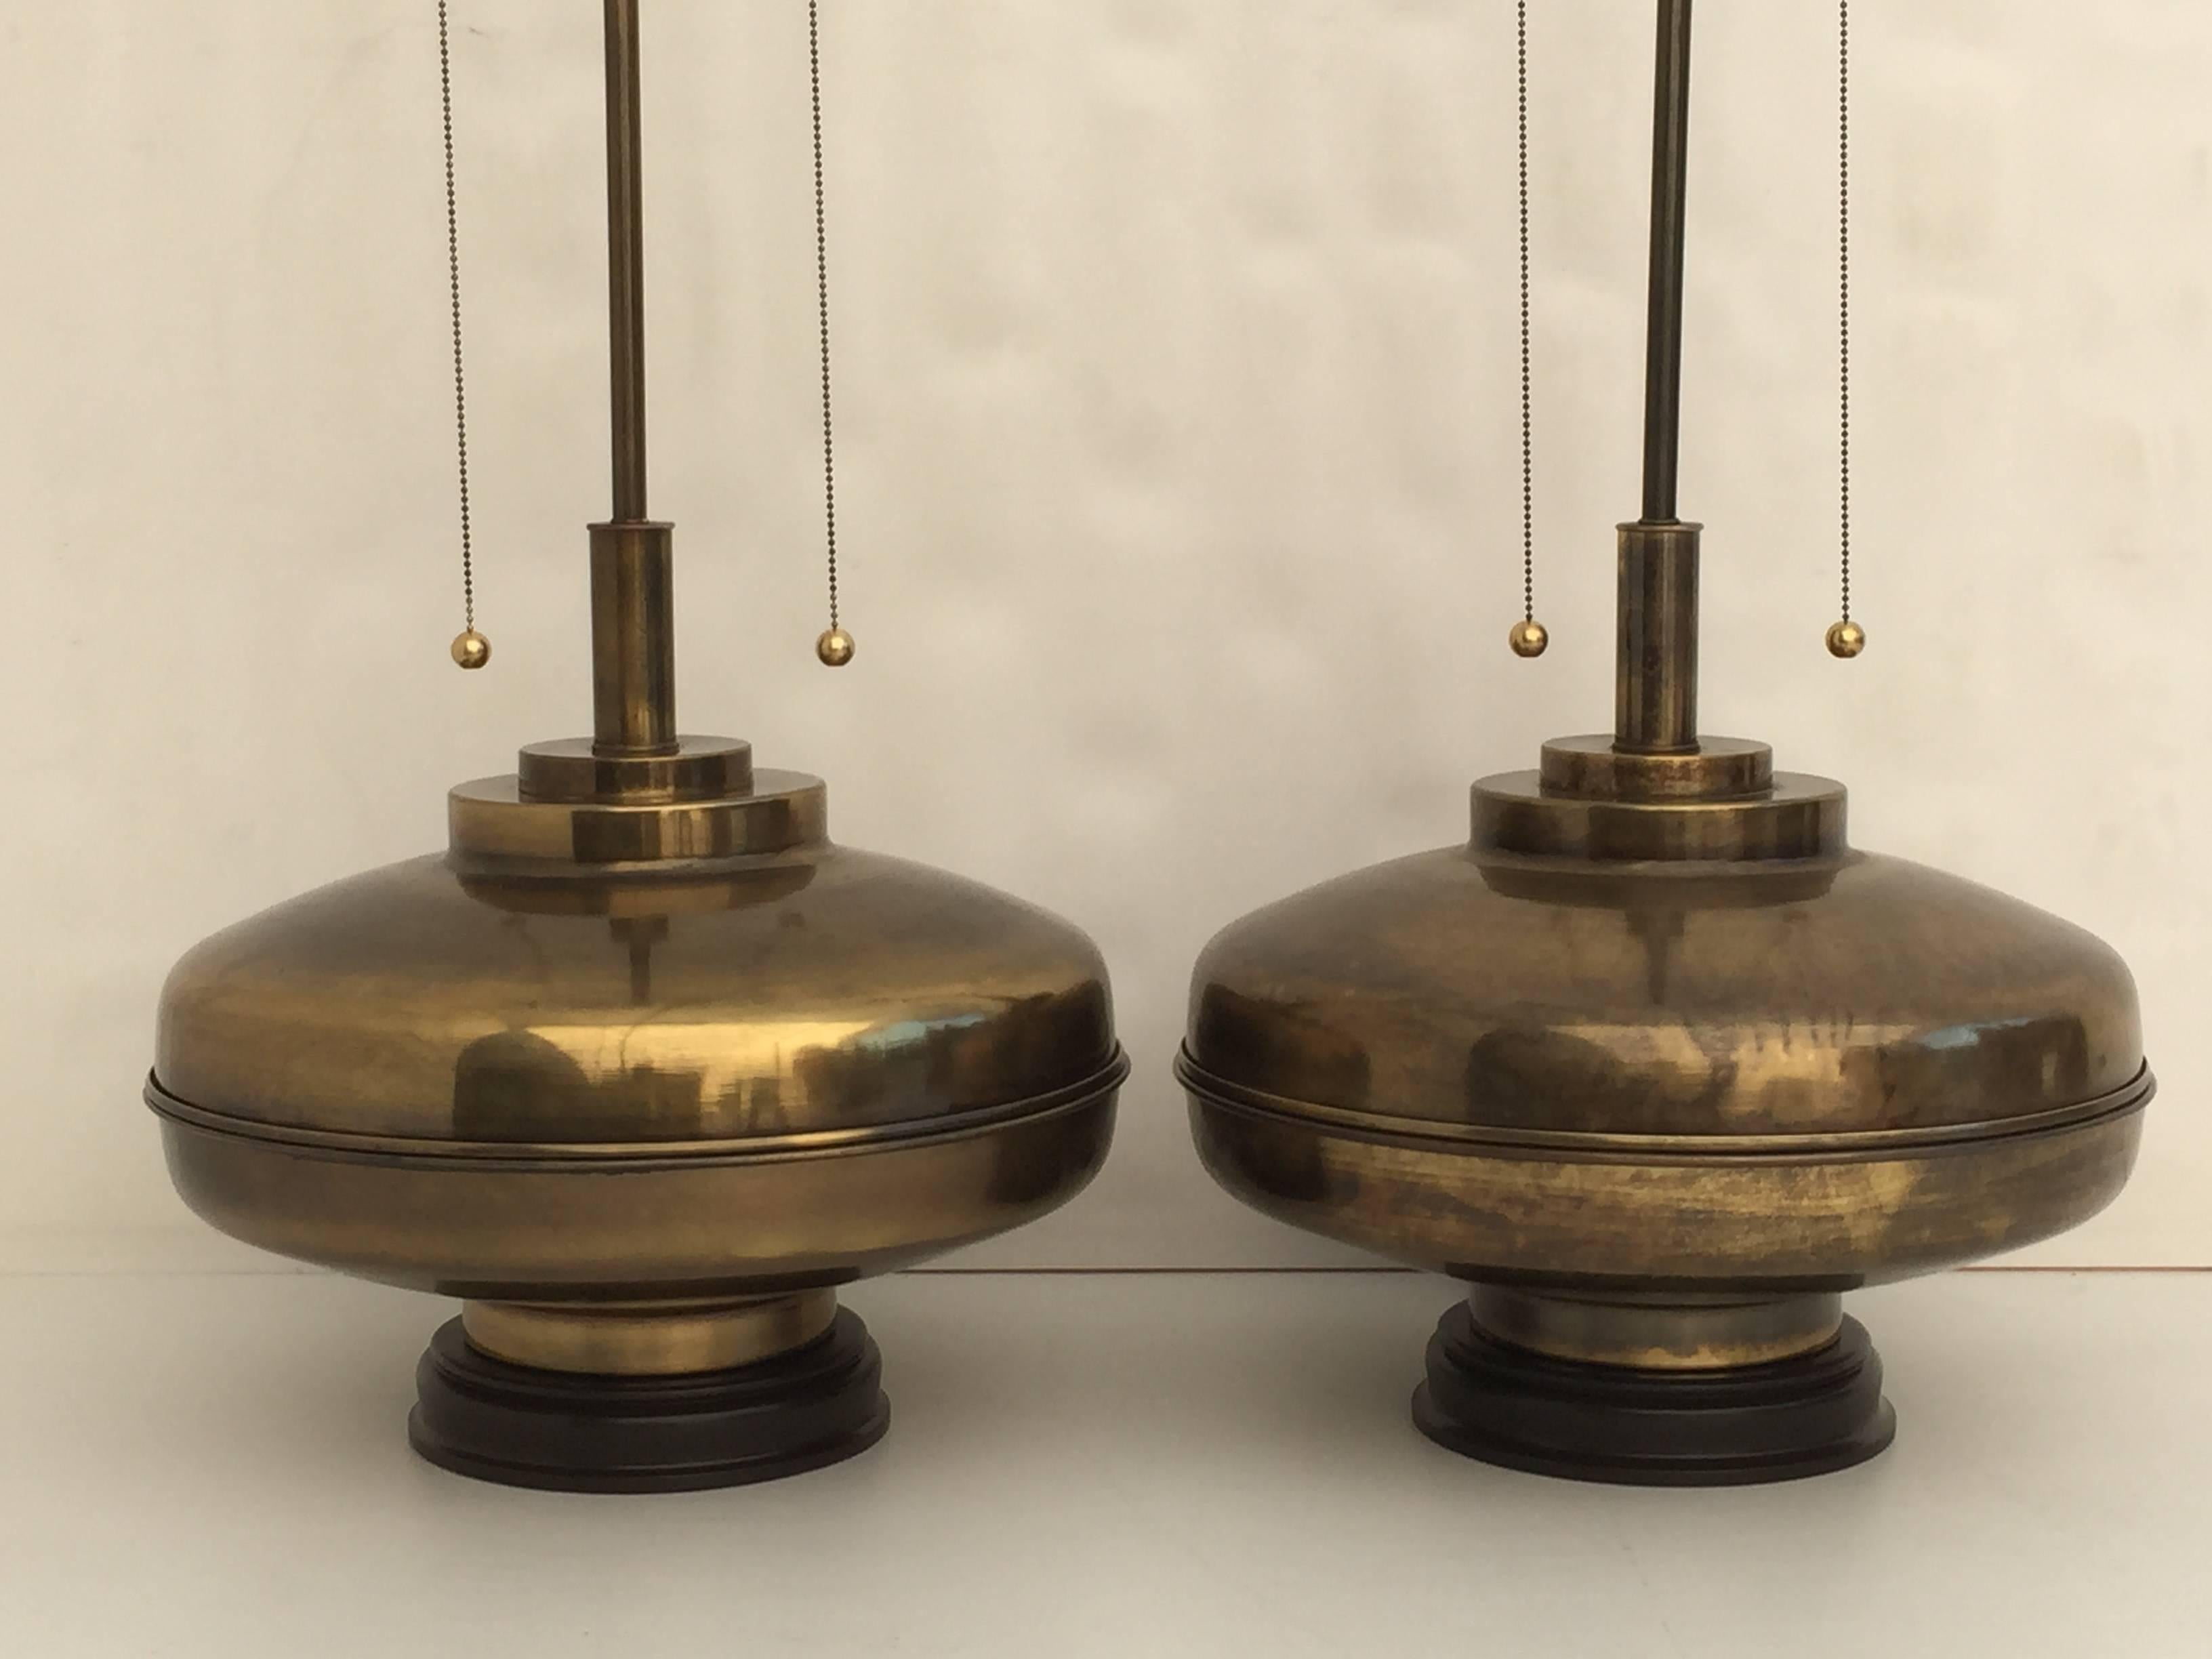 Pair of giant lamps in antiqued bronze finish. One lamp has a age spot on the back side.